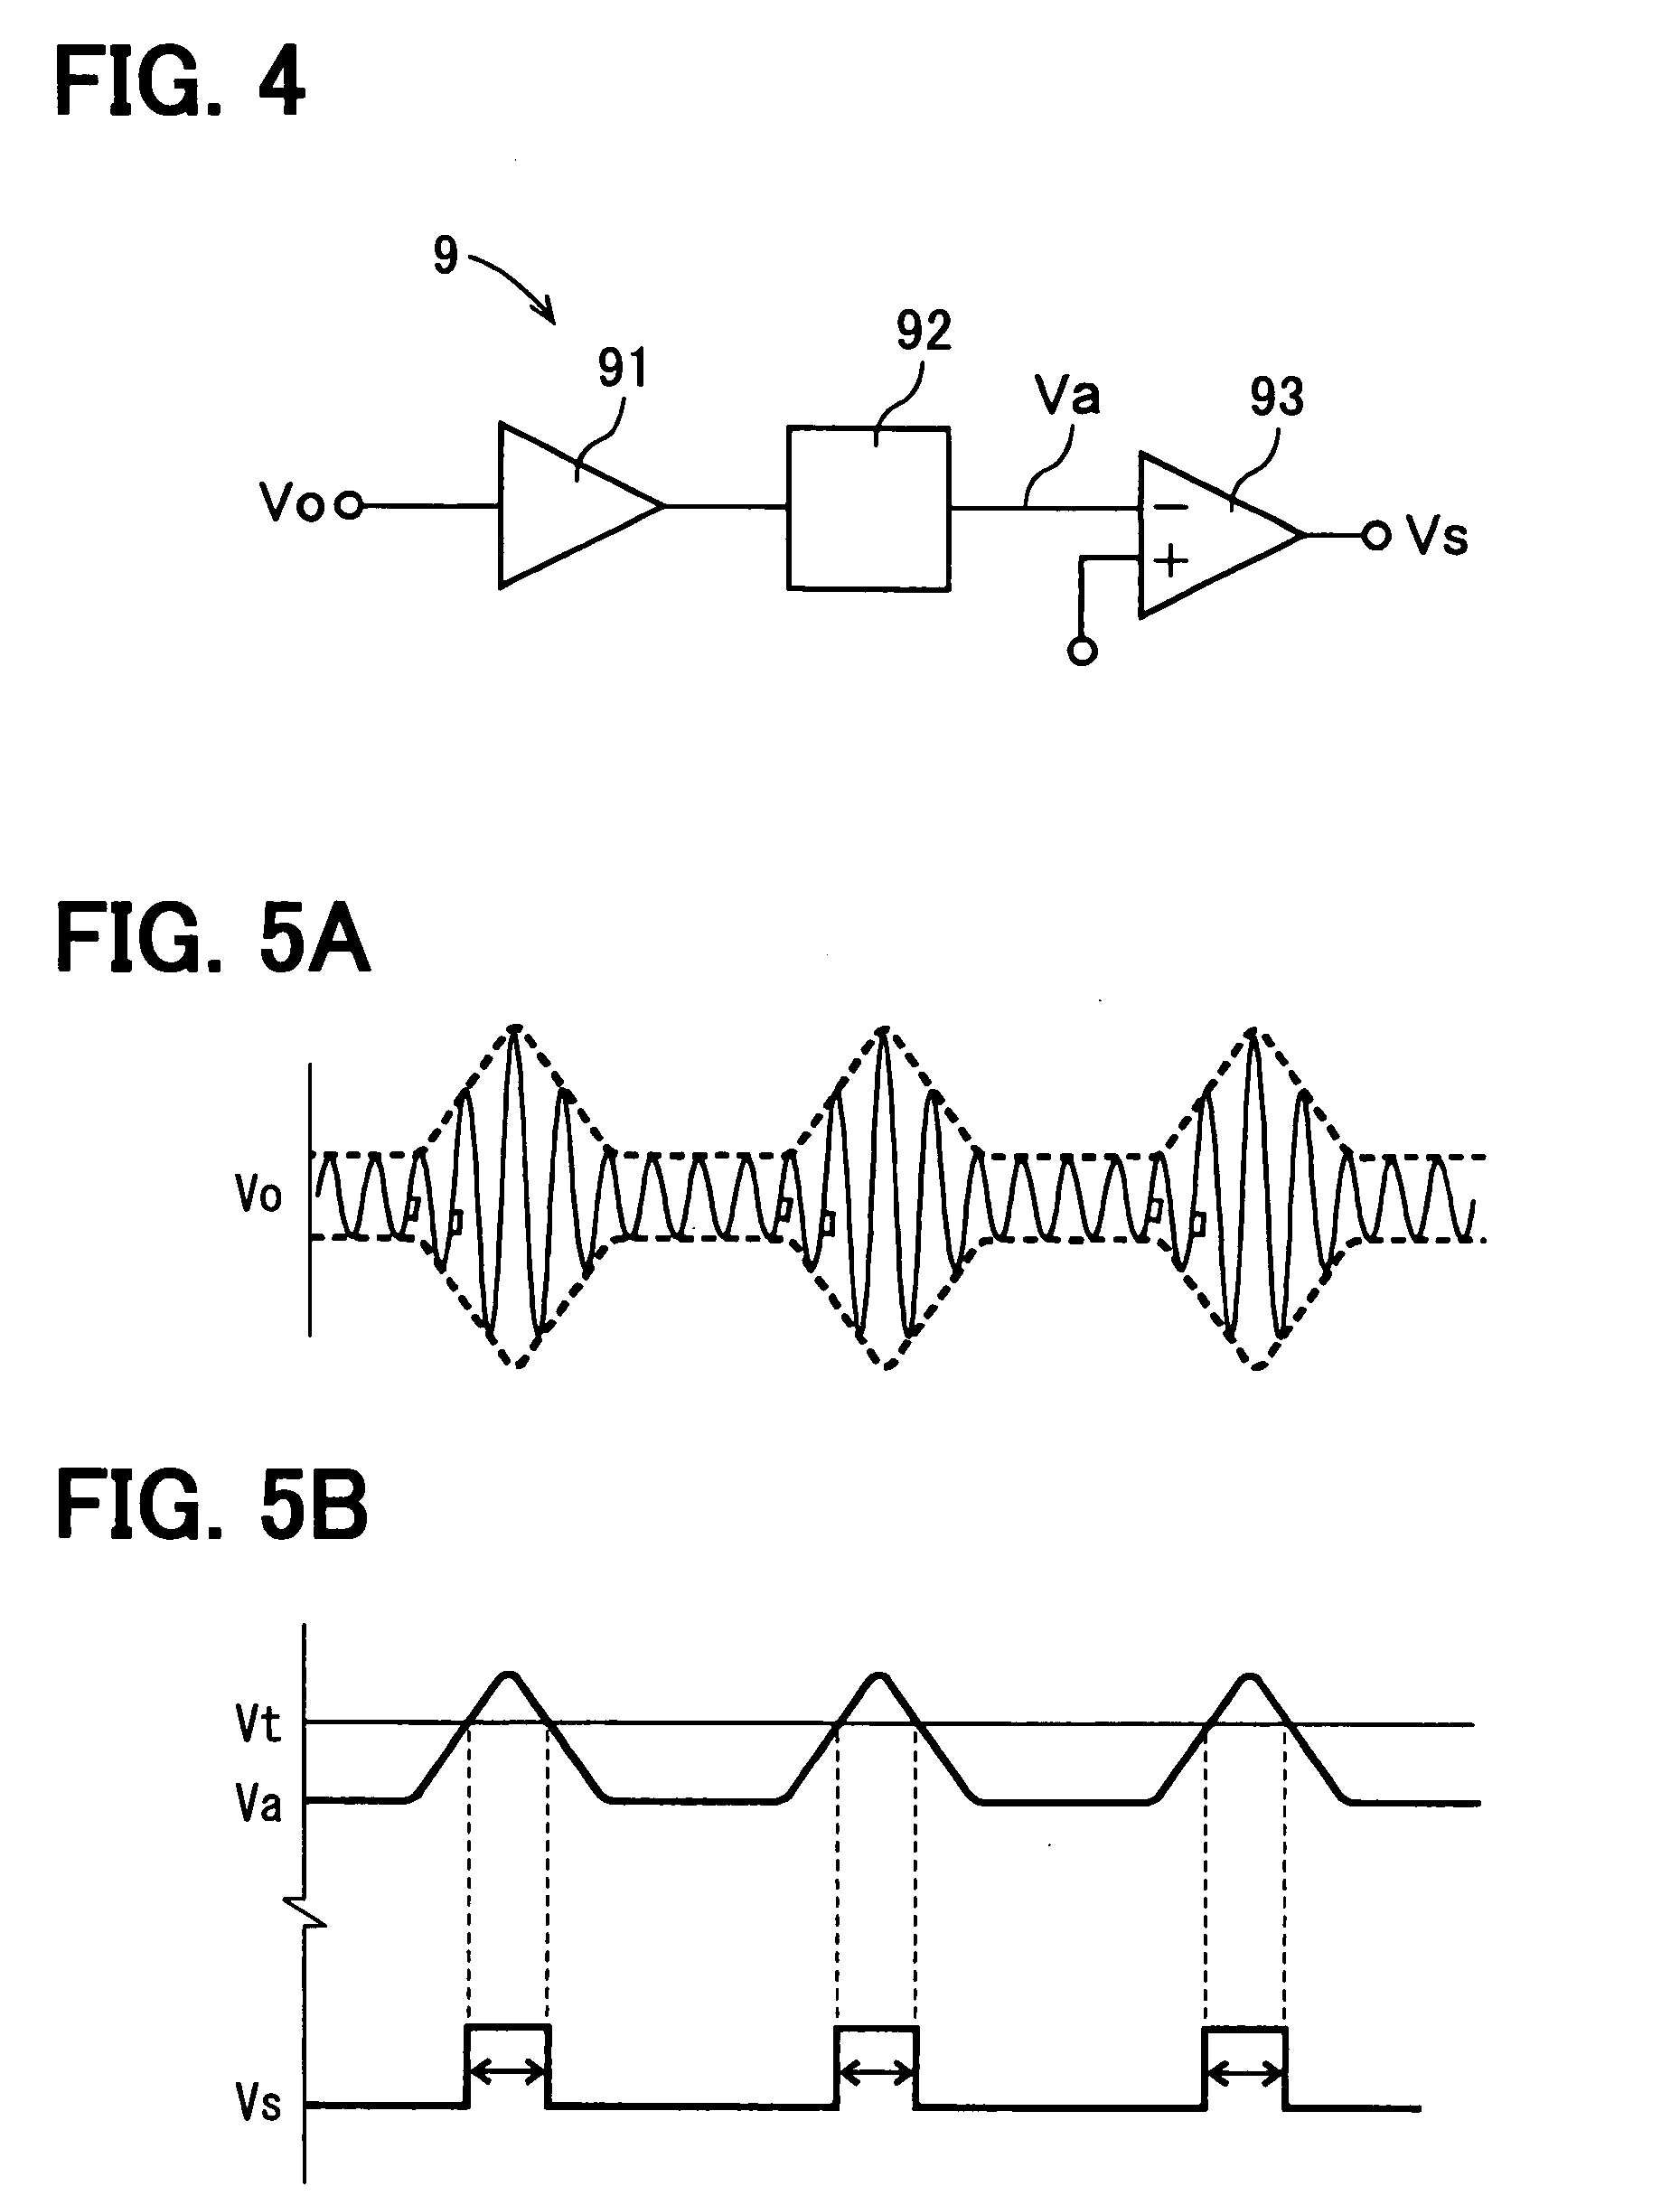 Eddy current type sensor for detecting conductor